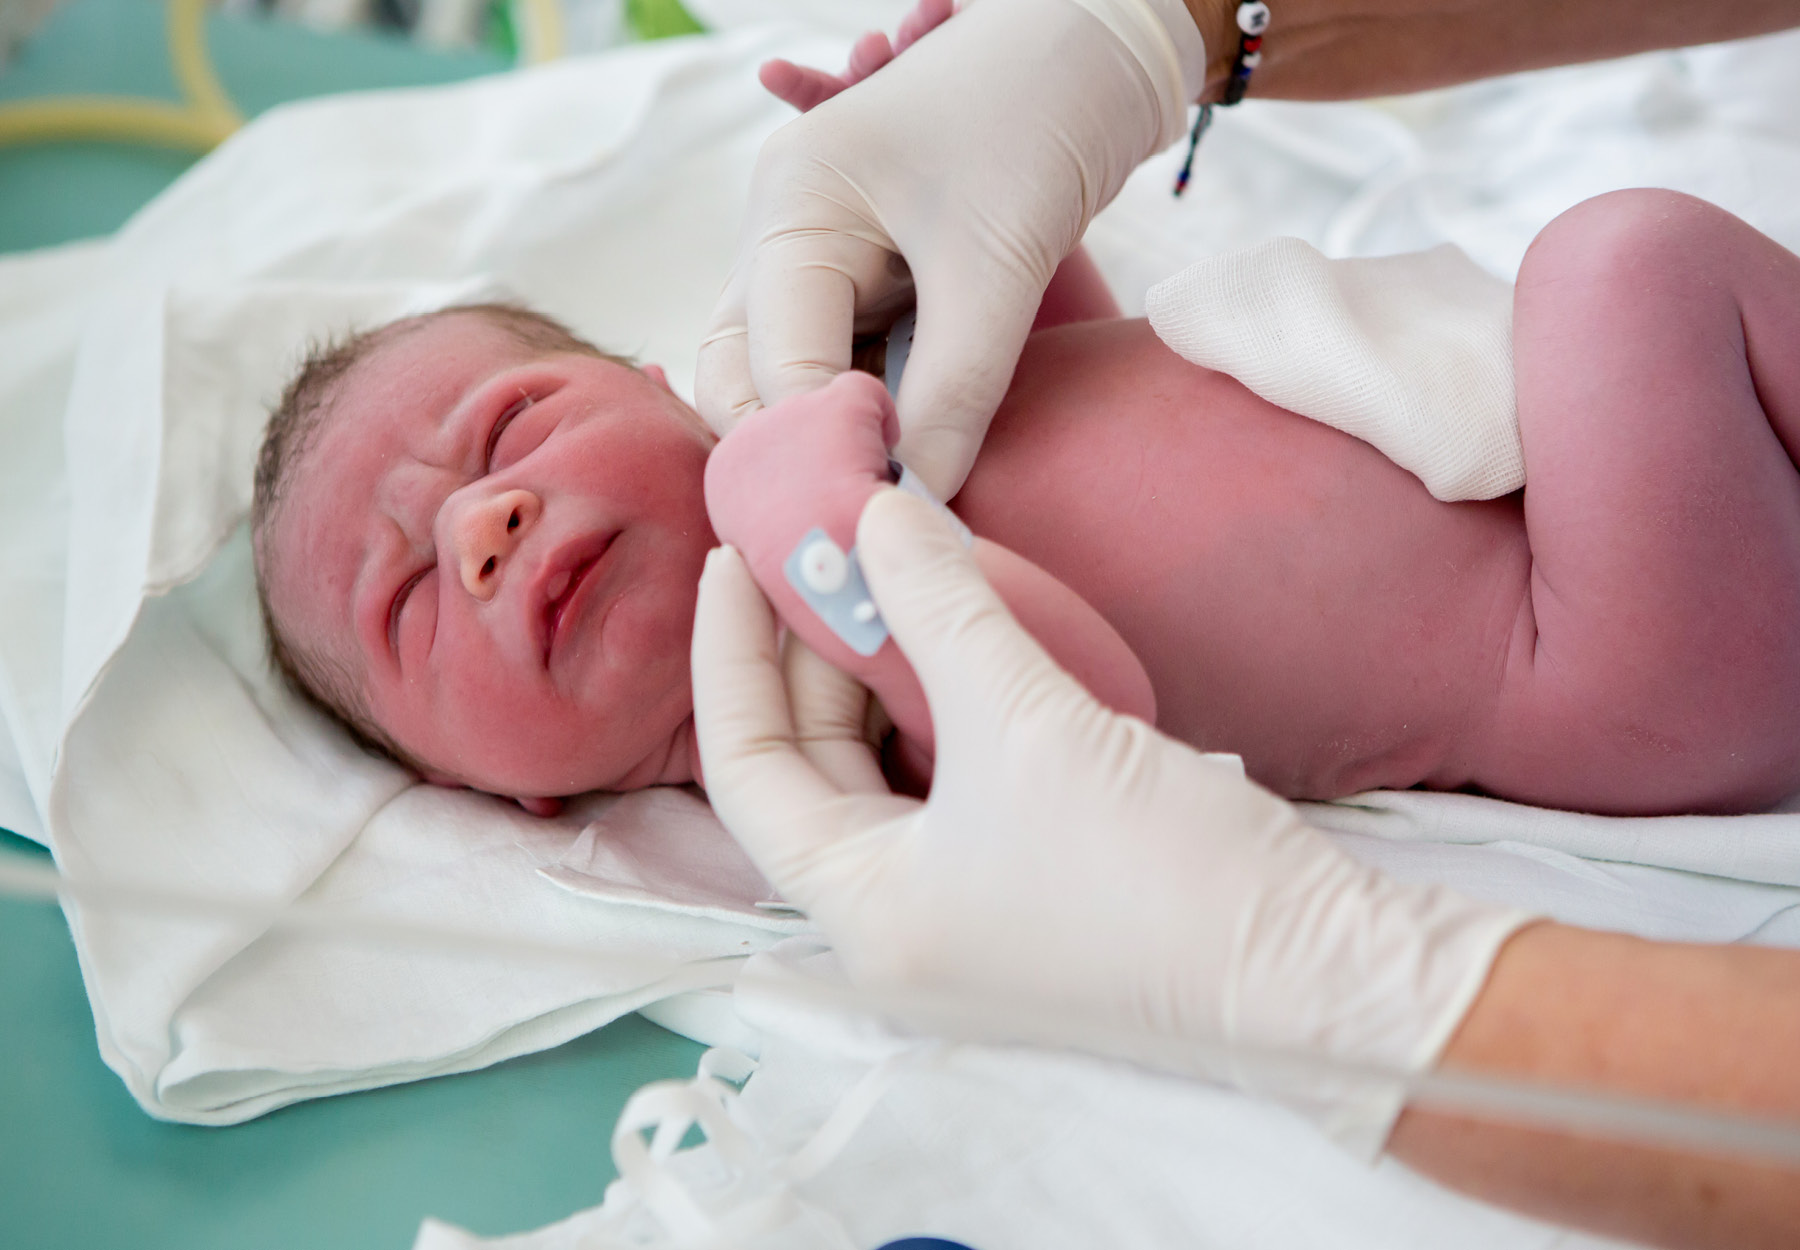 Image of newborn baby being examined by healthcare professional wearing white disposable gloves. iStock image.